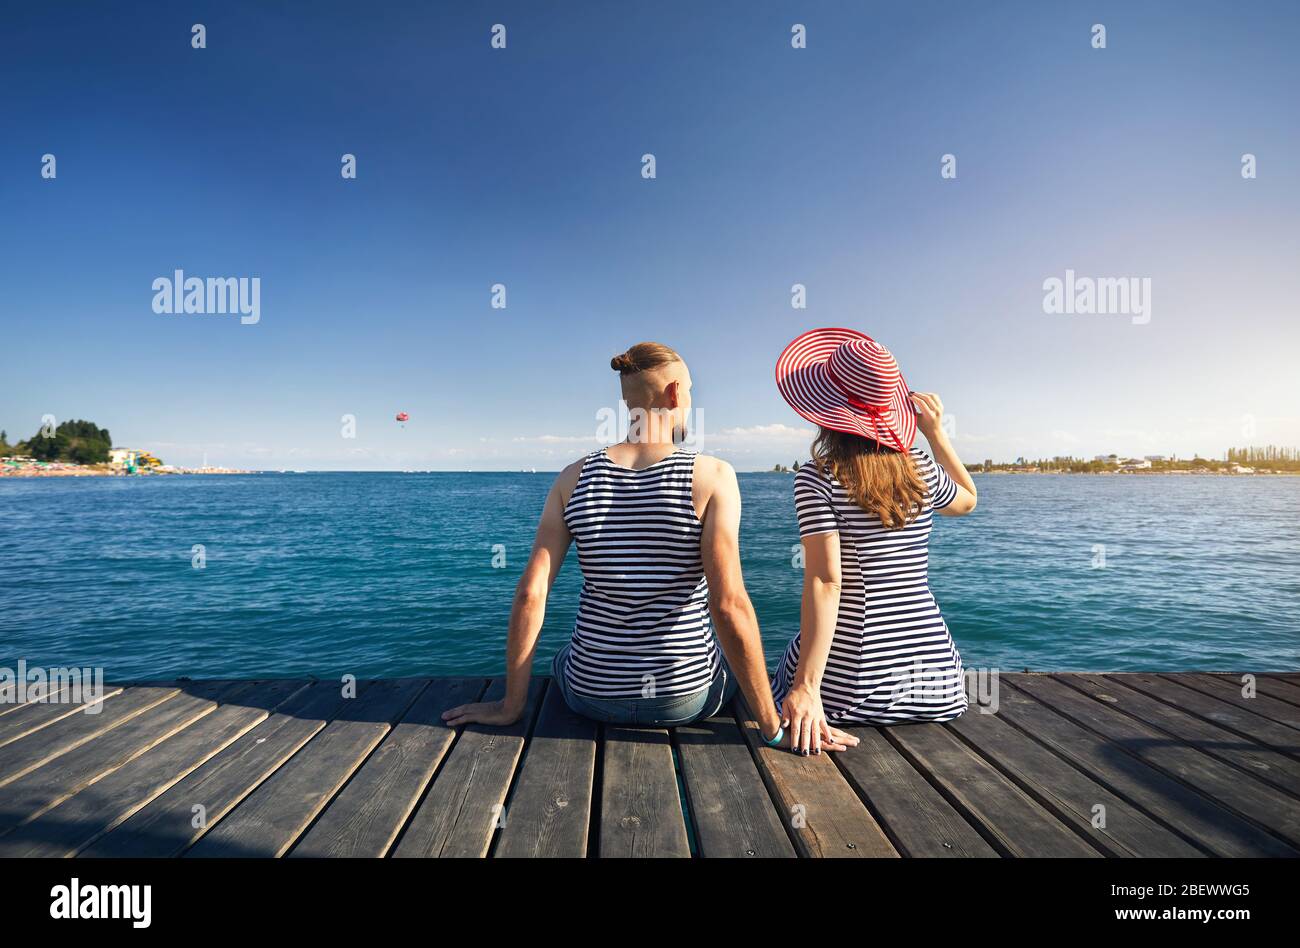 Romantic couple in striped dress sitting on pier and looking at blue Lake Issyk Kul in Kyrgyzstan. Summer and Sea concept. Stock Photo